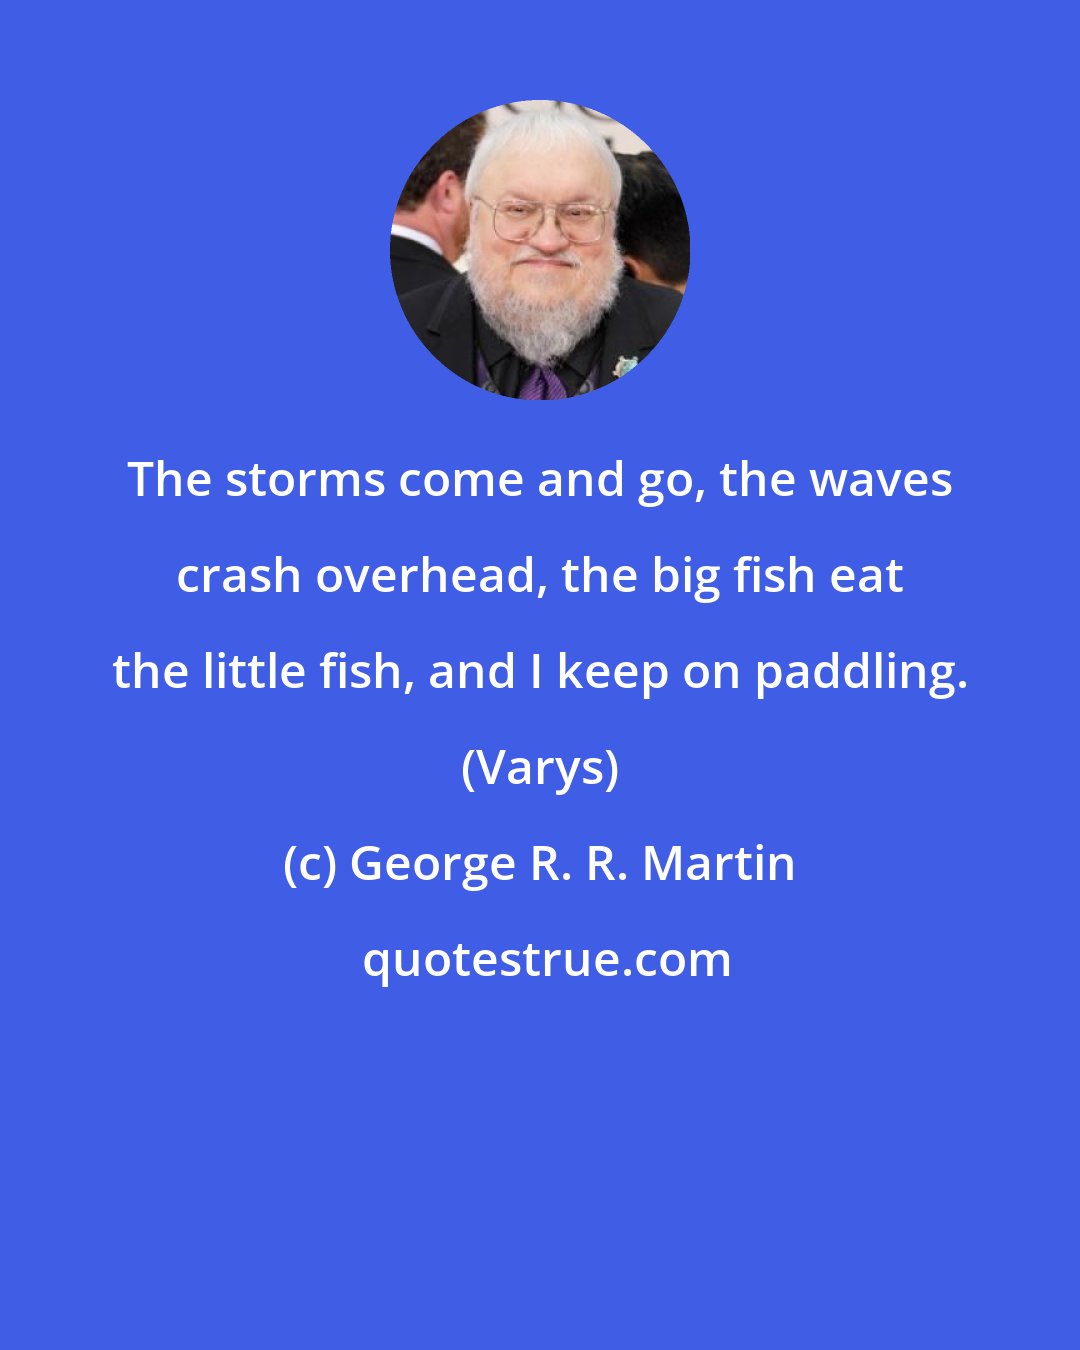 George R. R. Martin: The storms come and go, the waves crash overhead, the big fish eat the little fish, and I keep on paddling. (Varys)